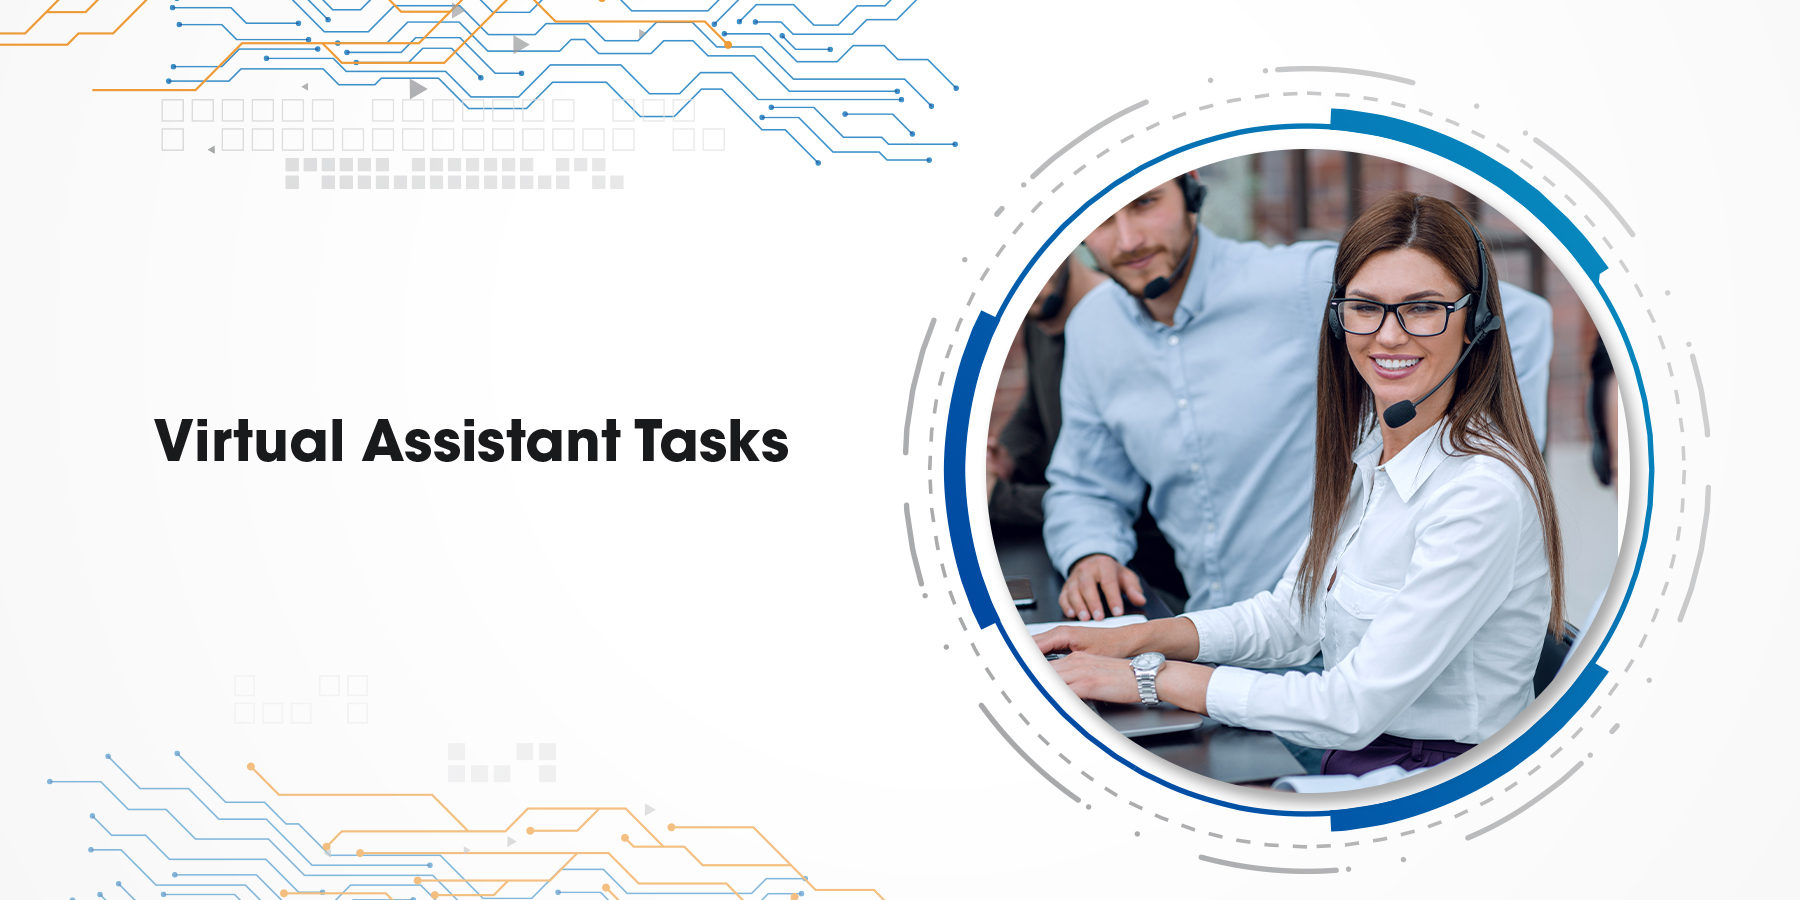 Save time and grow your business exponentially by outsourcing these ten tasks to a virtual assistant